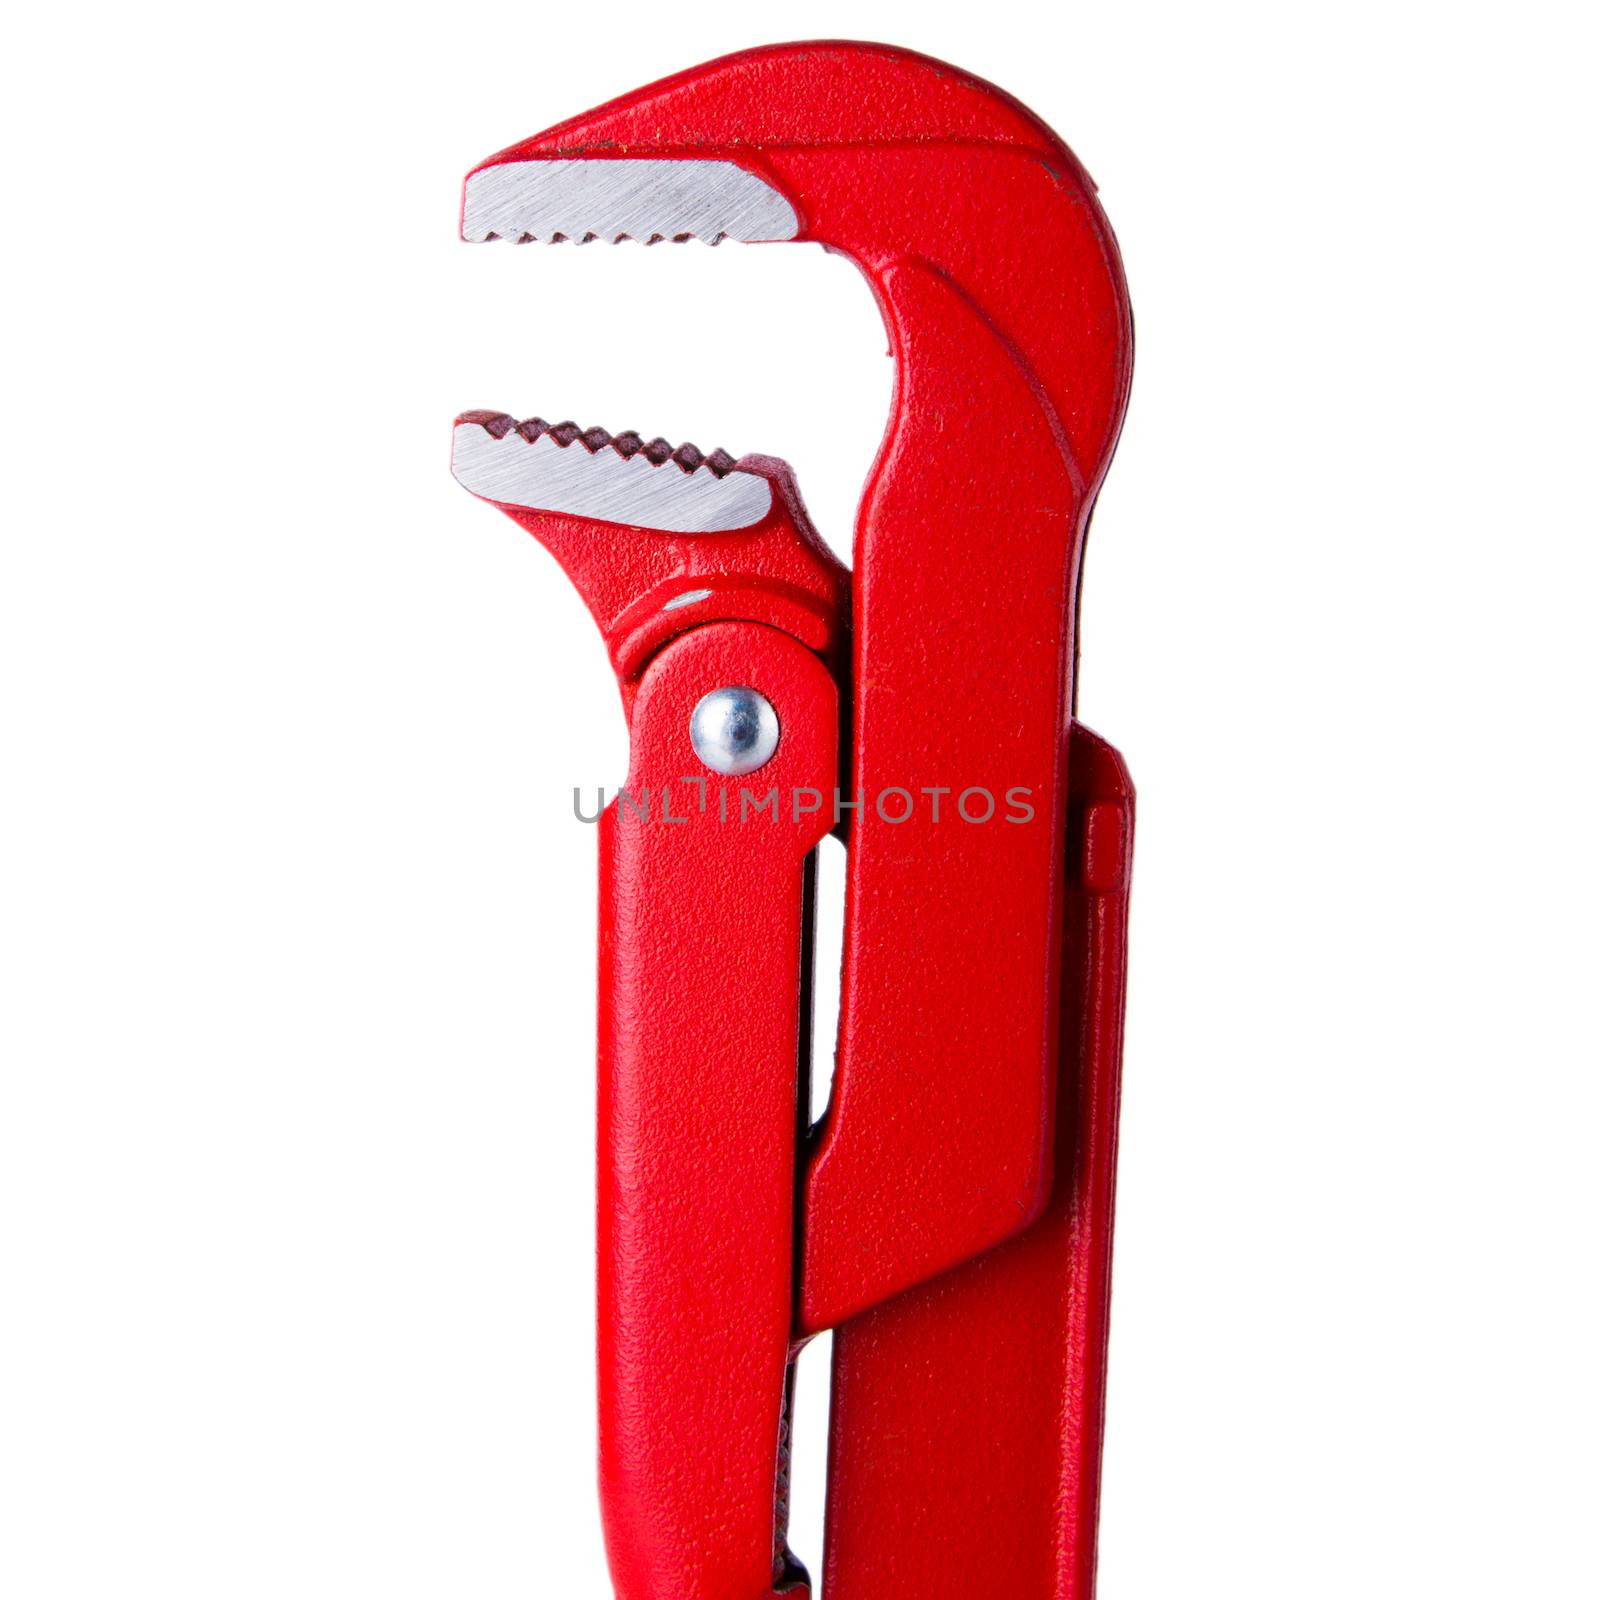 Adjustable pipe wrench, isolated on a white background